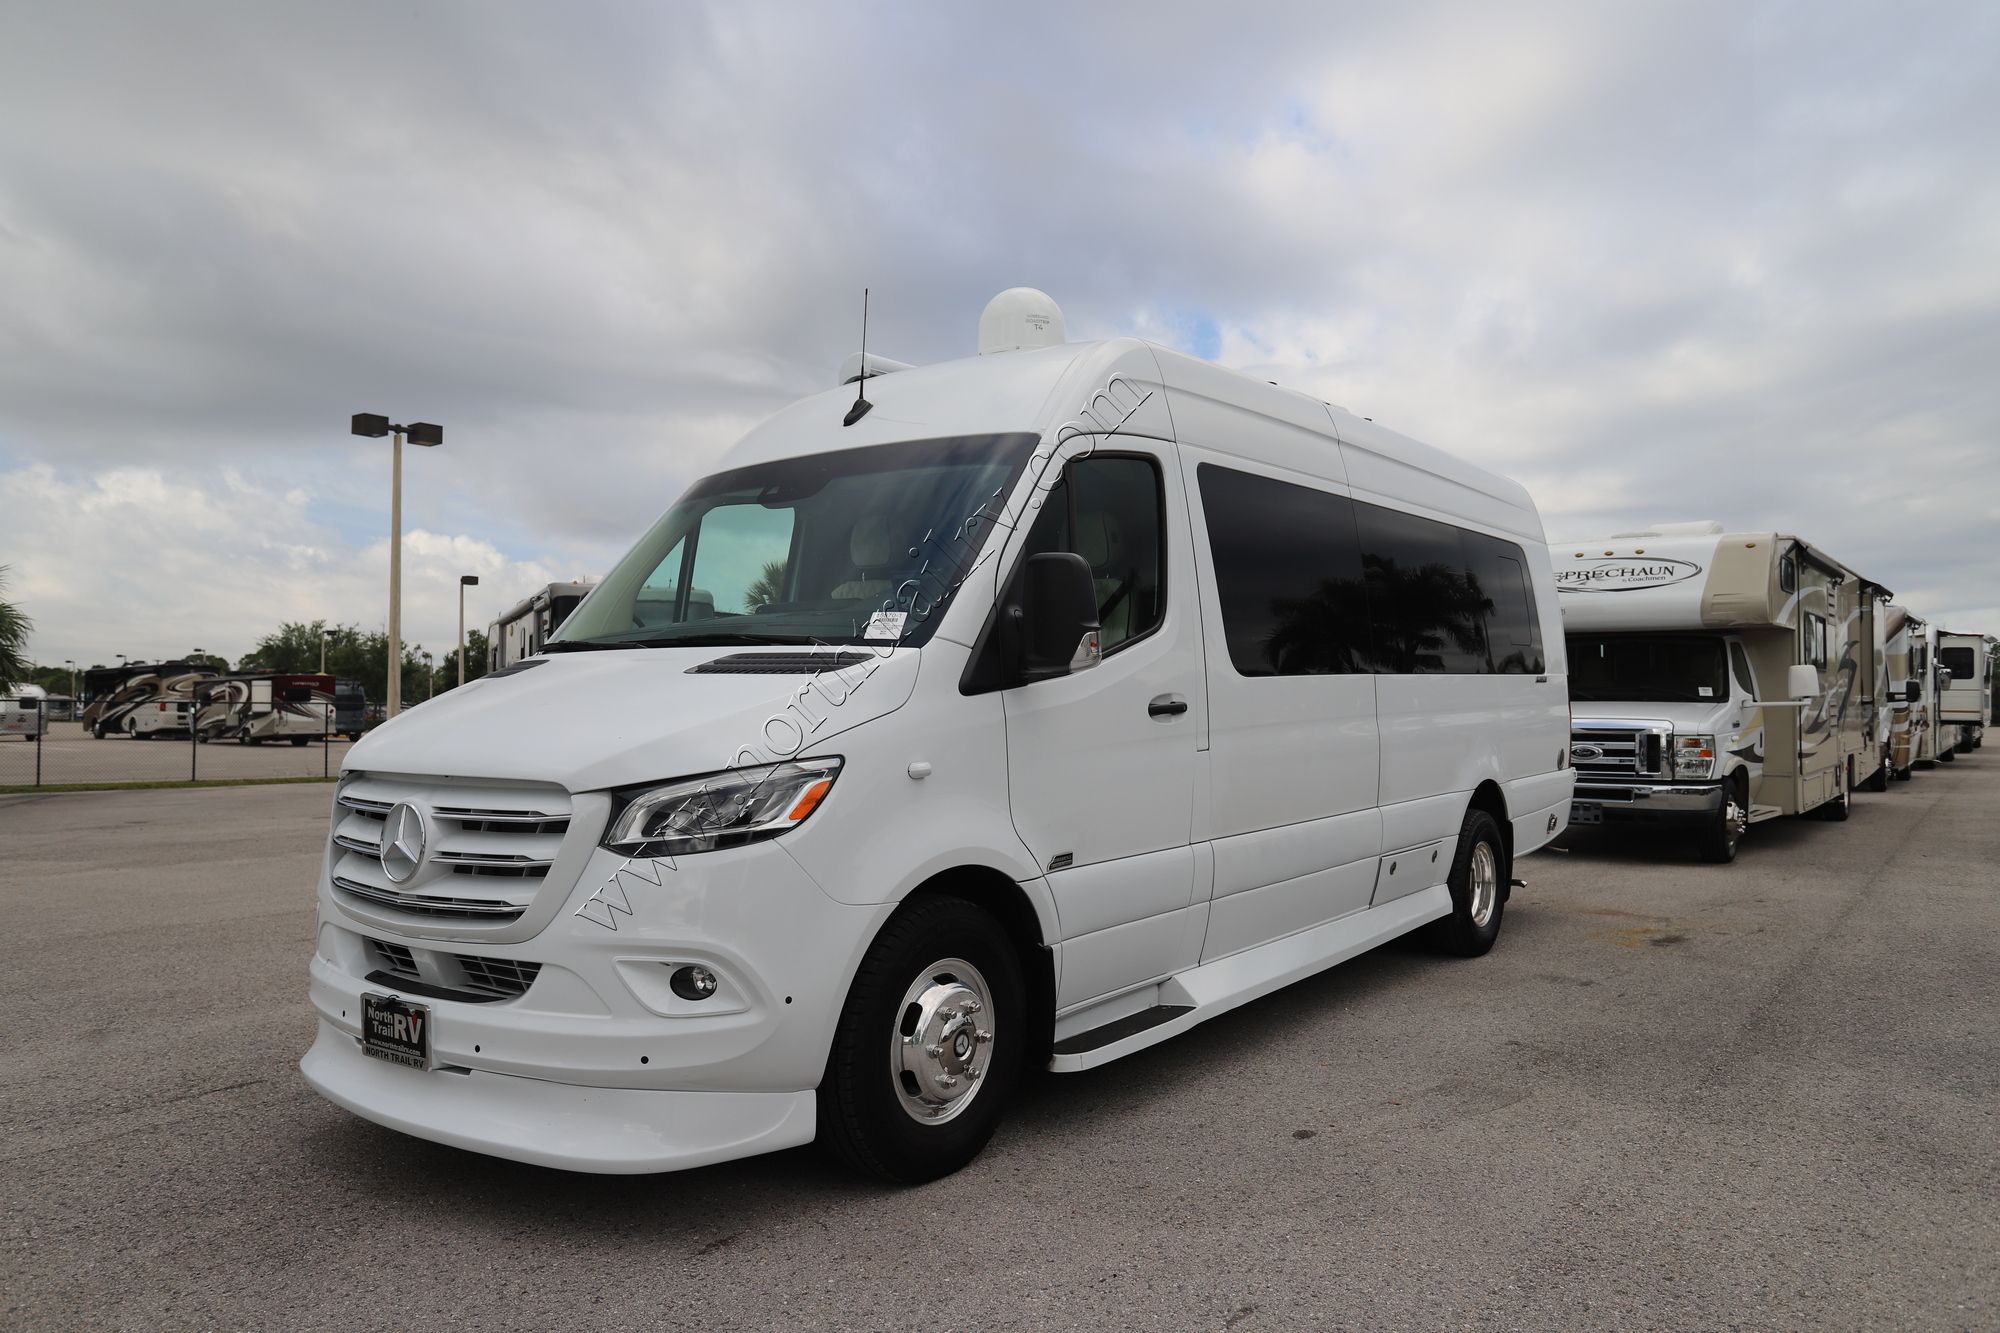 Used 2023 Midwest Passage 170 Ext MD4 Class B  For Sale